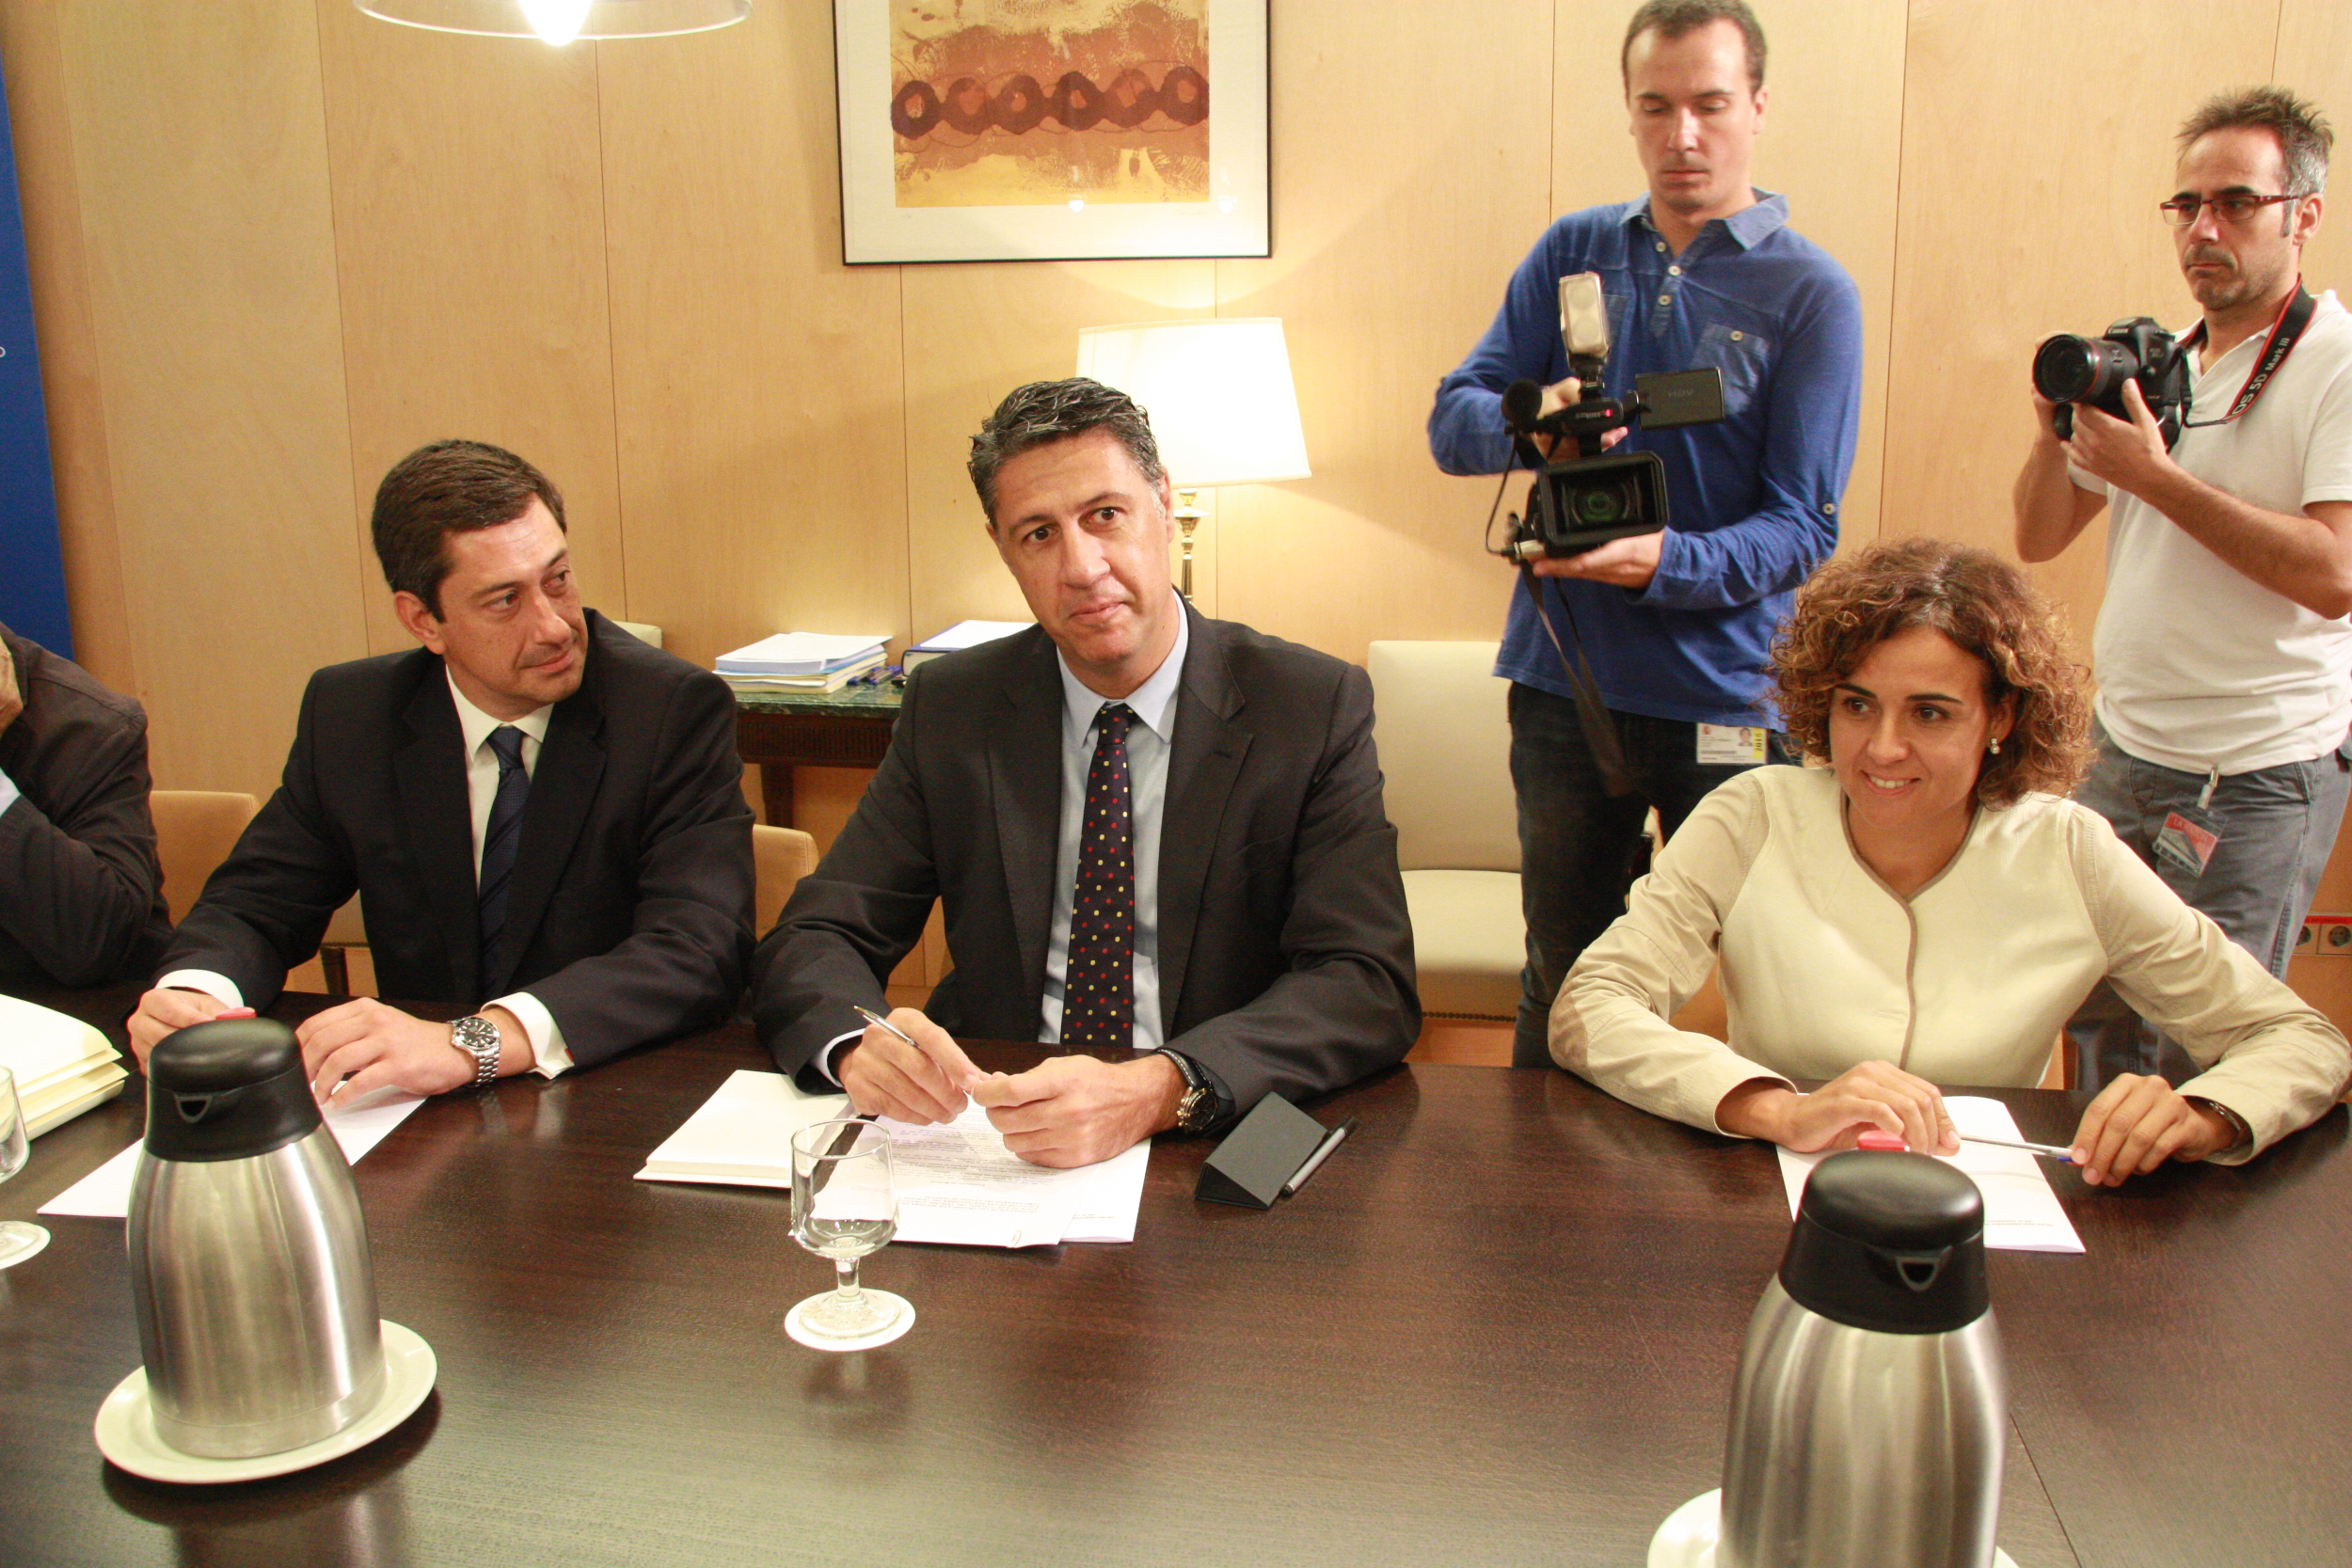 PP's candidate for Catalan elections, Xavier Garcia Albiol, presented a reform to be able to suspend Mas from office